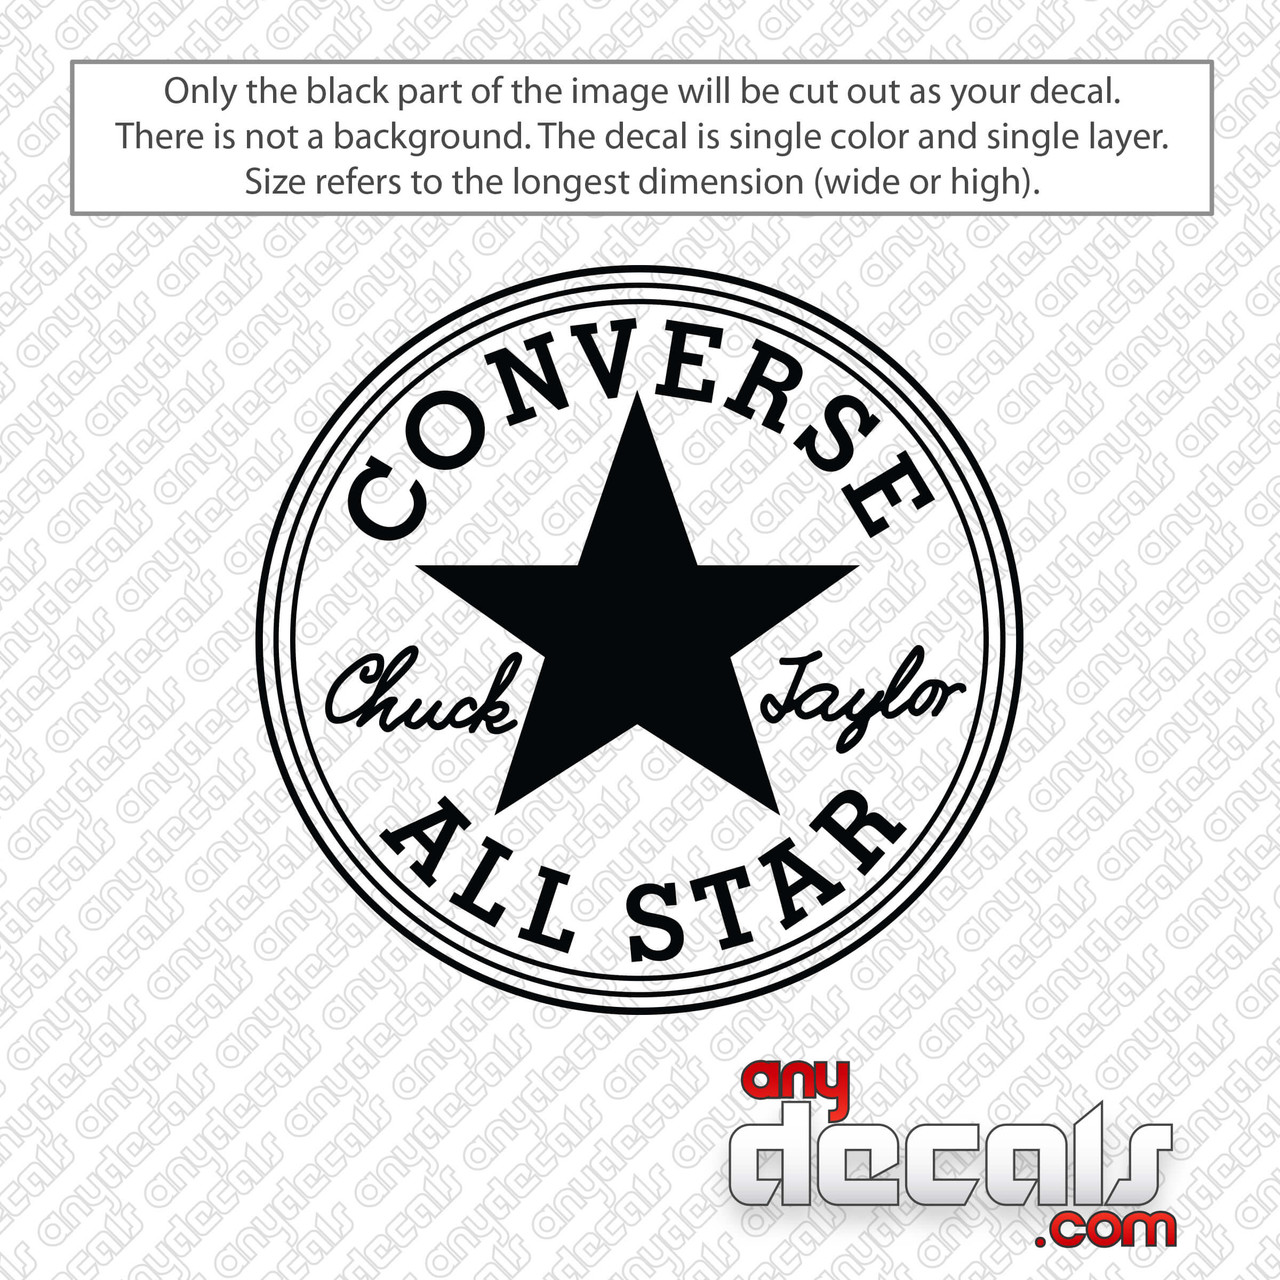 Converse Chuck Taylor Decal Sticker - AnyDecals.com